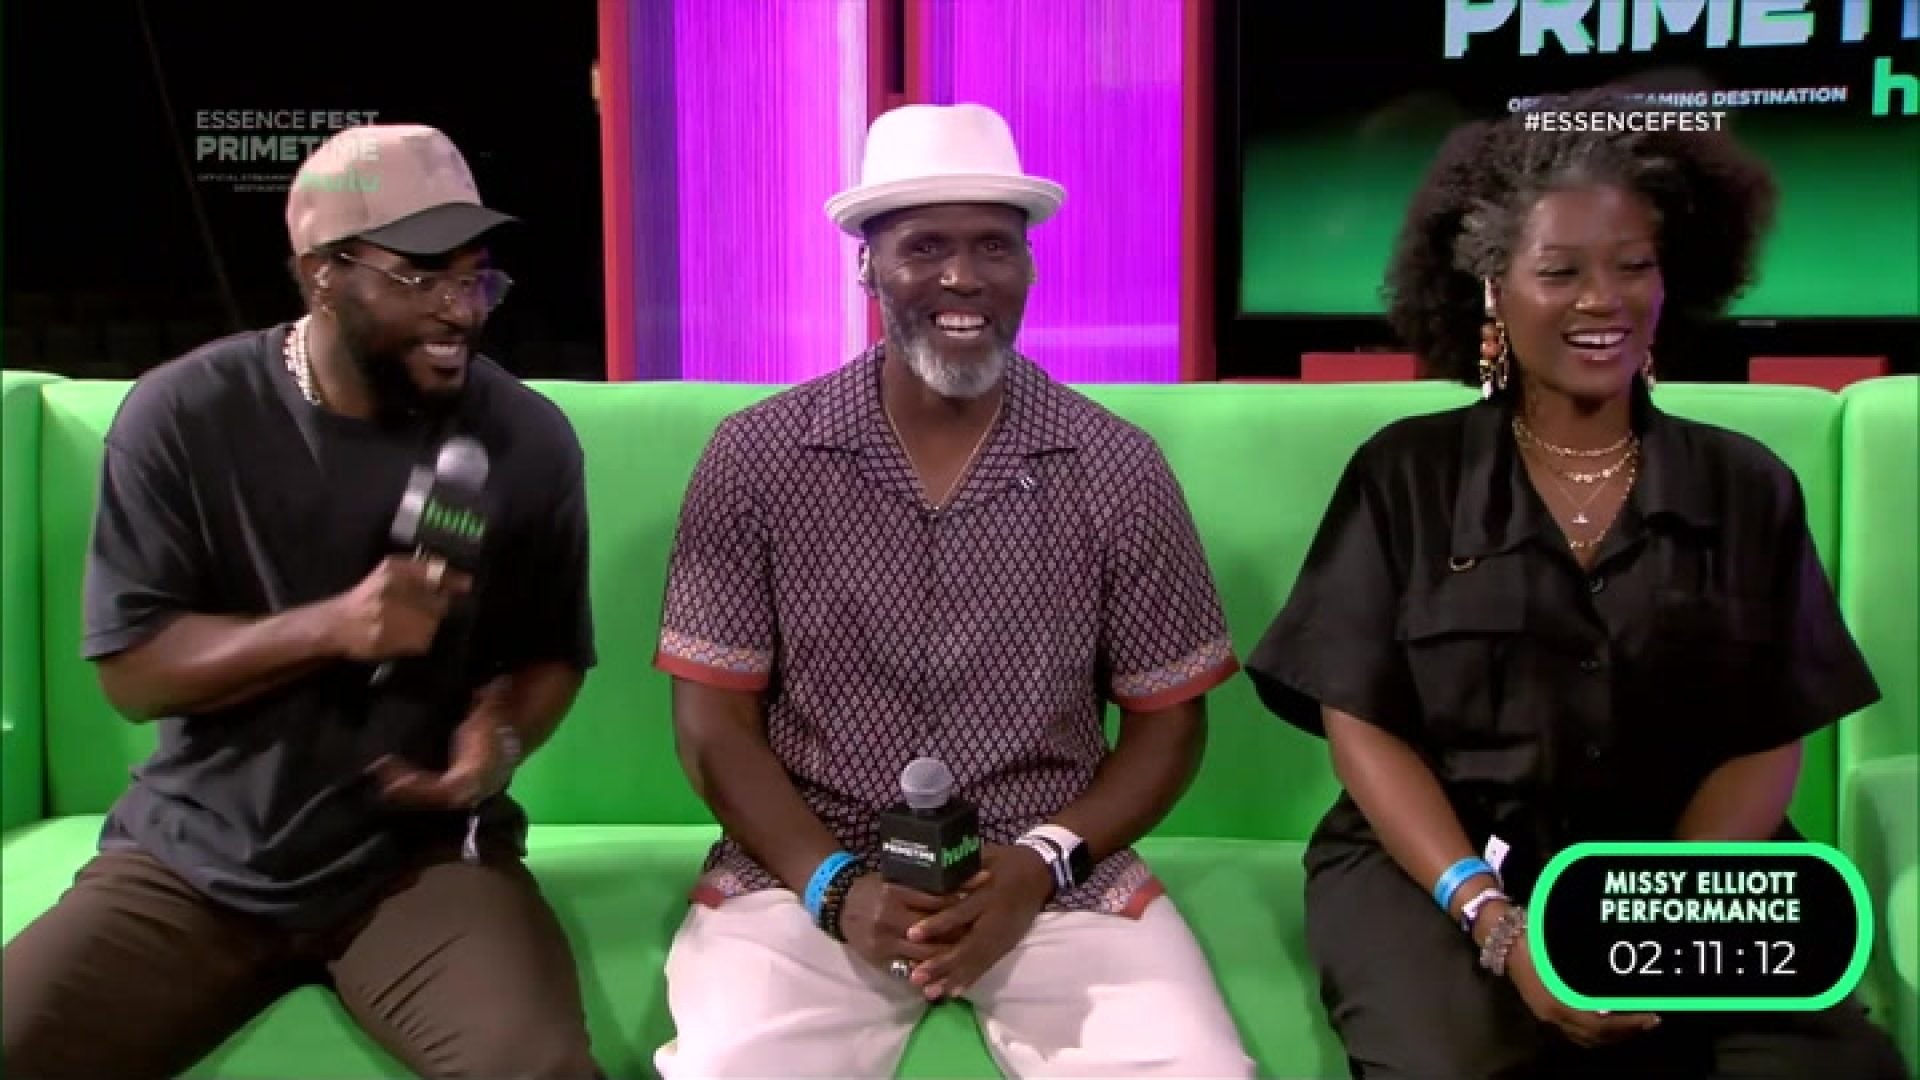 WATCH: ‘The Chi’ Cast Members Chat with Rocsi Diaz and Wallo